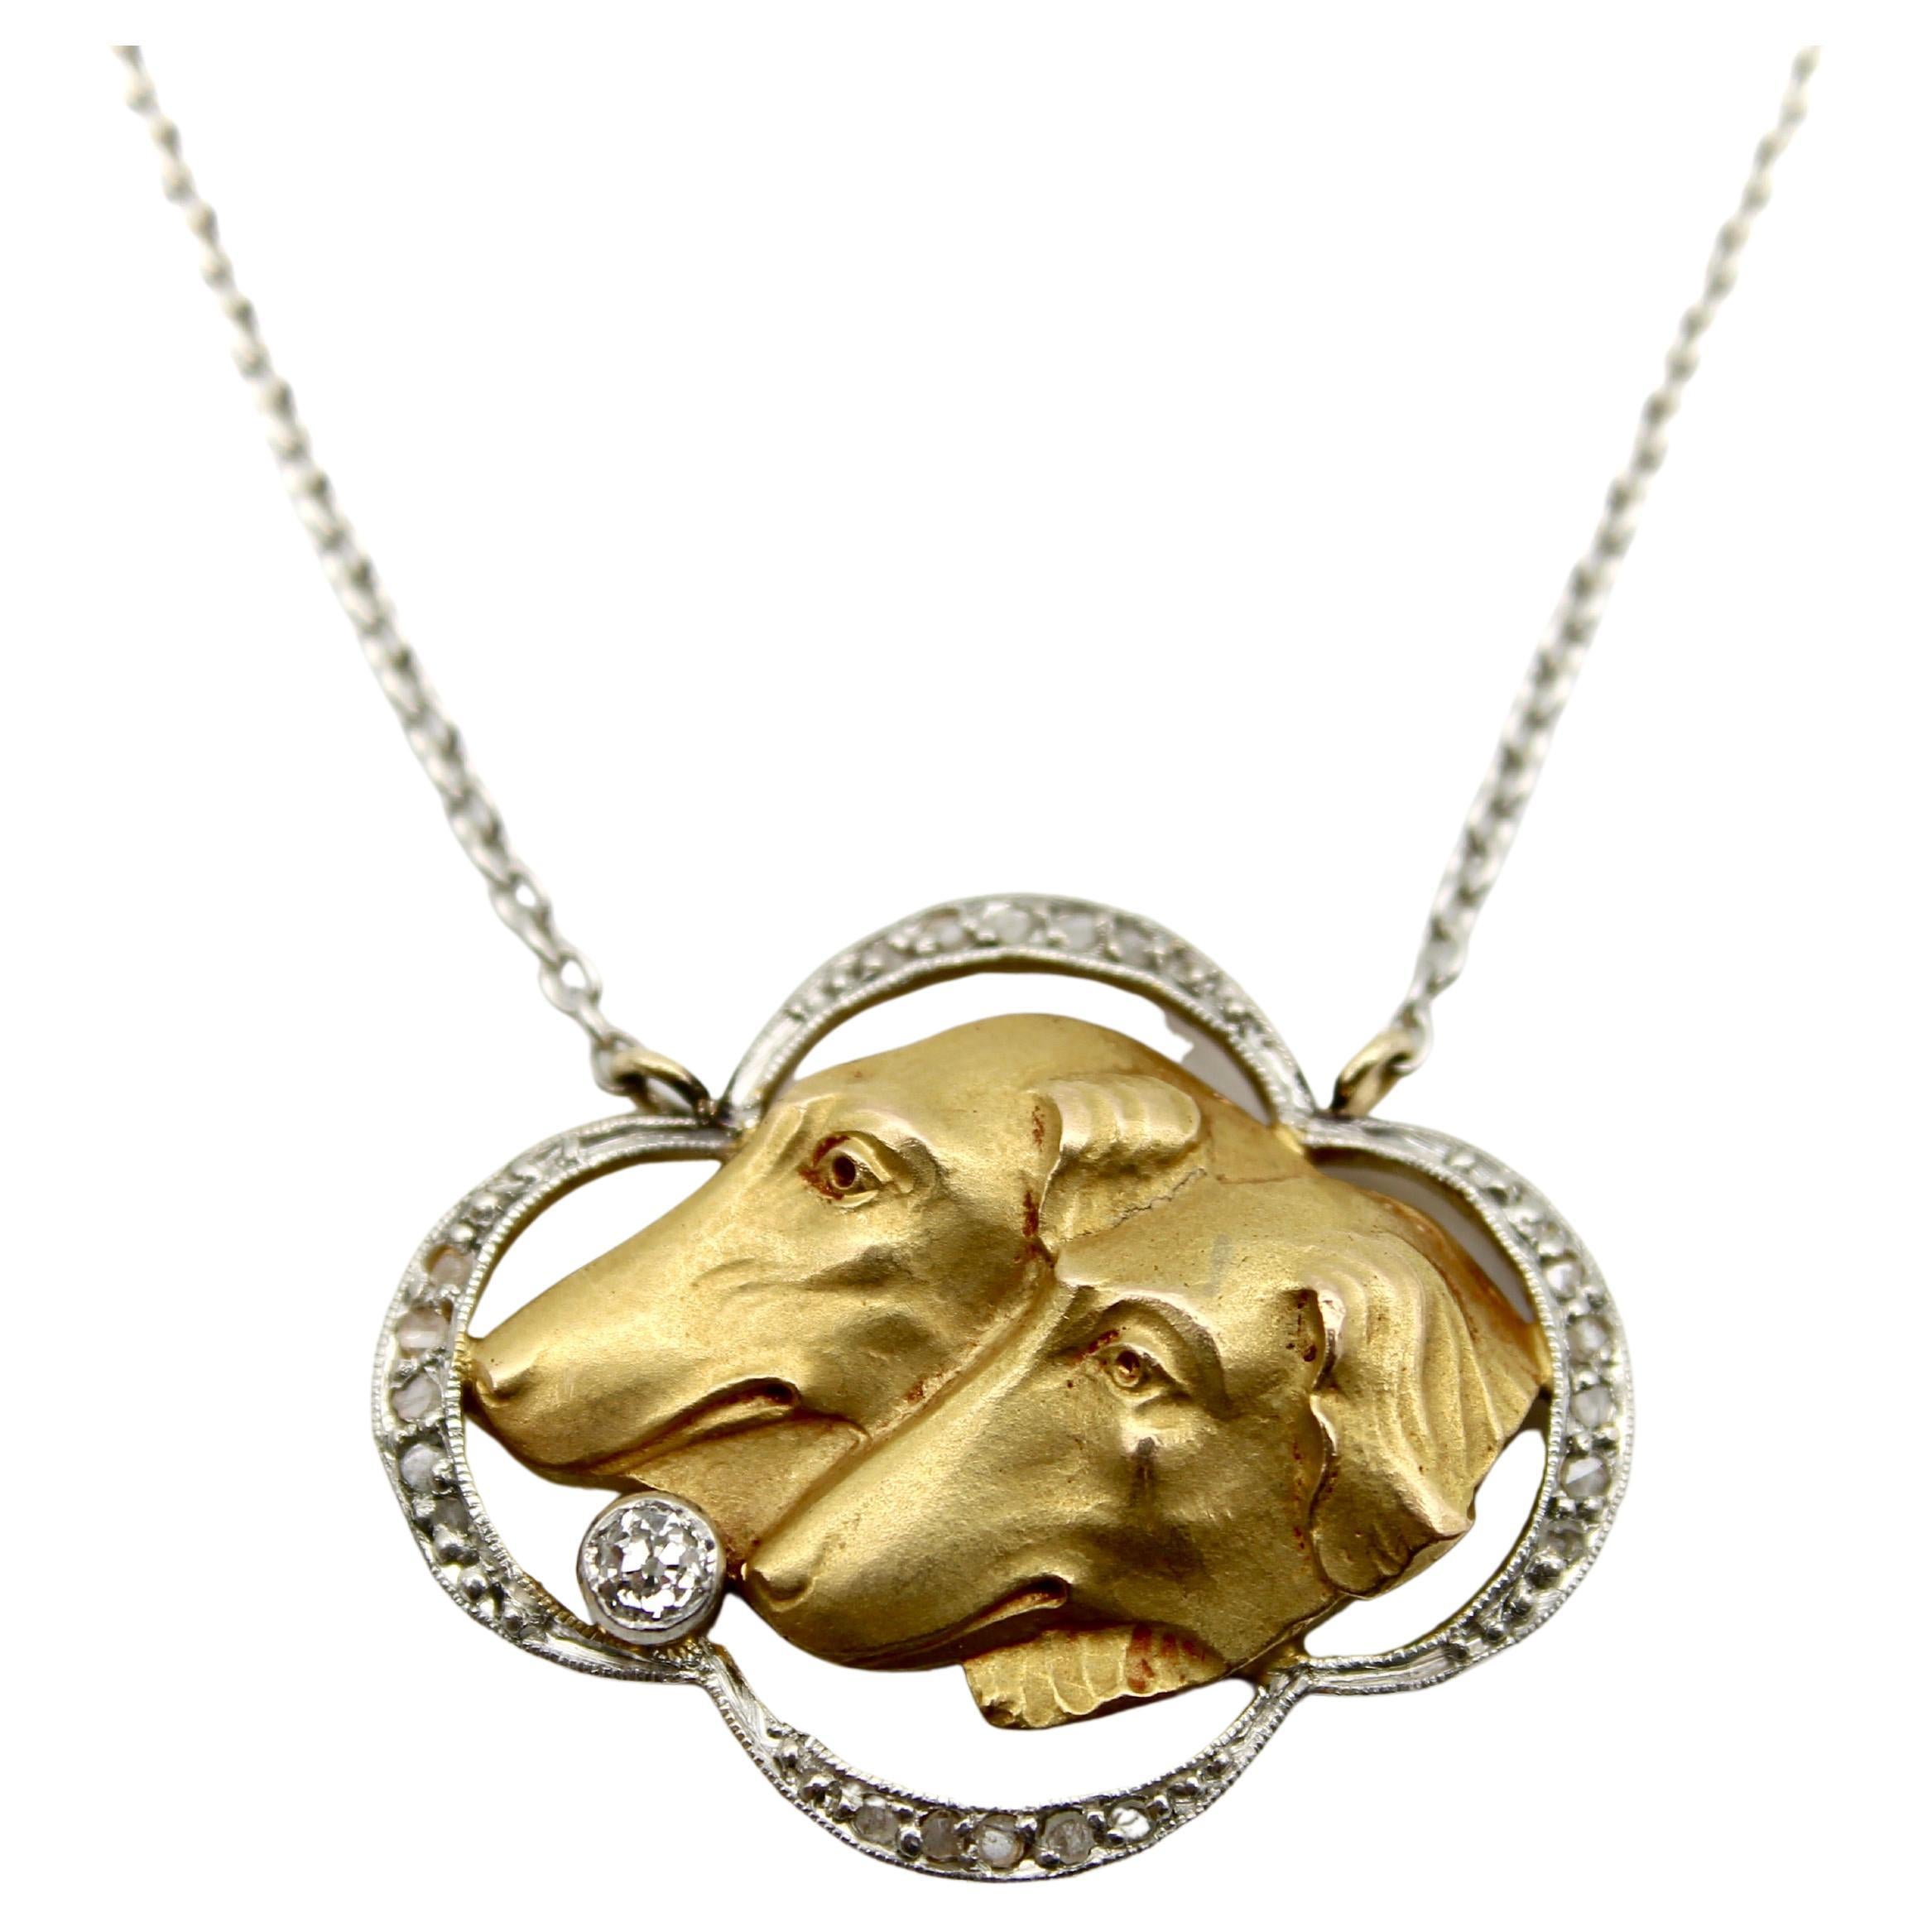 Edwardian 18K Gold and Platinum Wolfhound Necklace with Diamonds